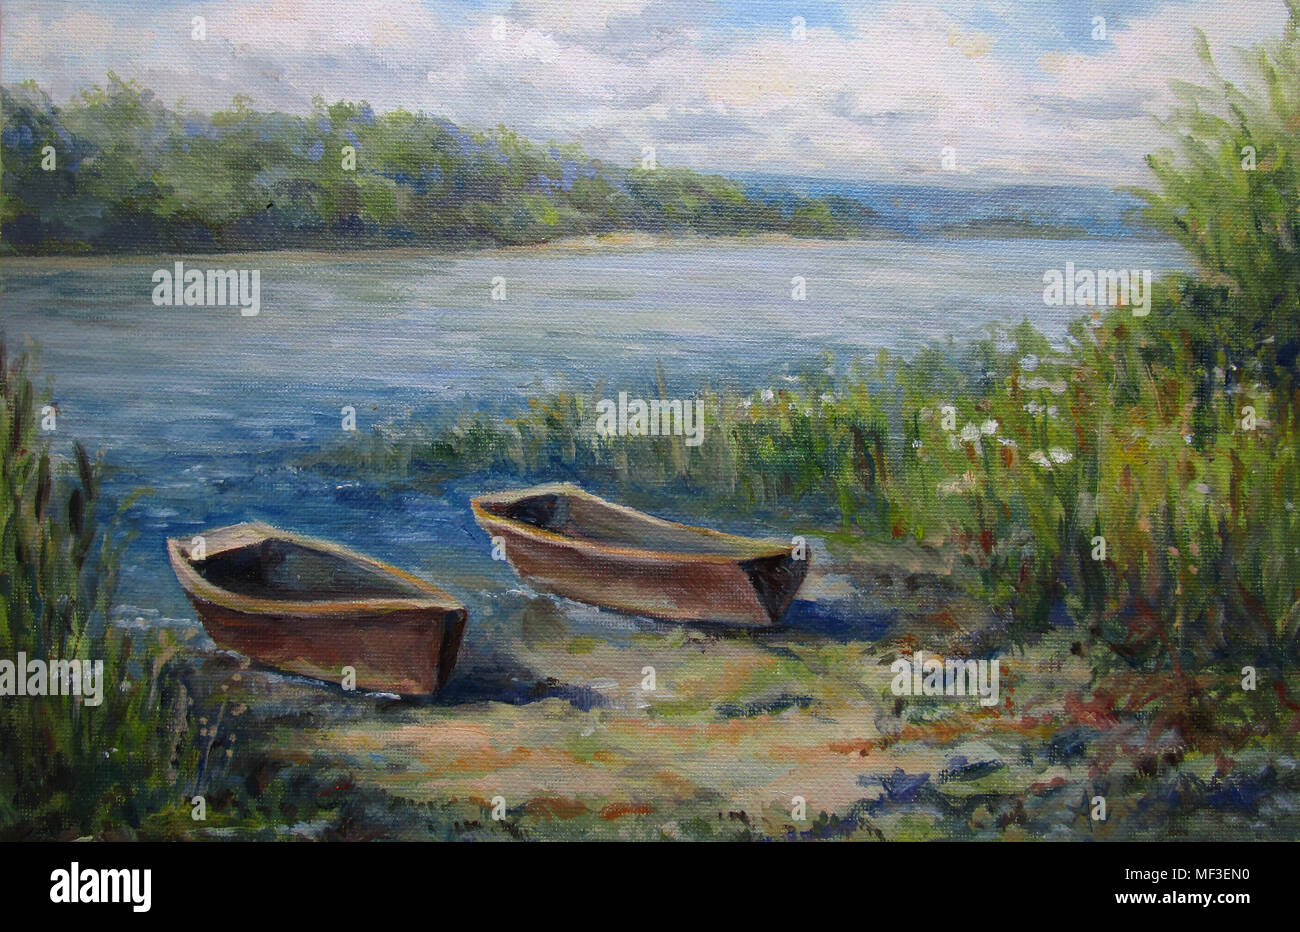 Forest landscape, with boats and river Stock Photo